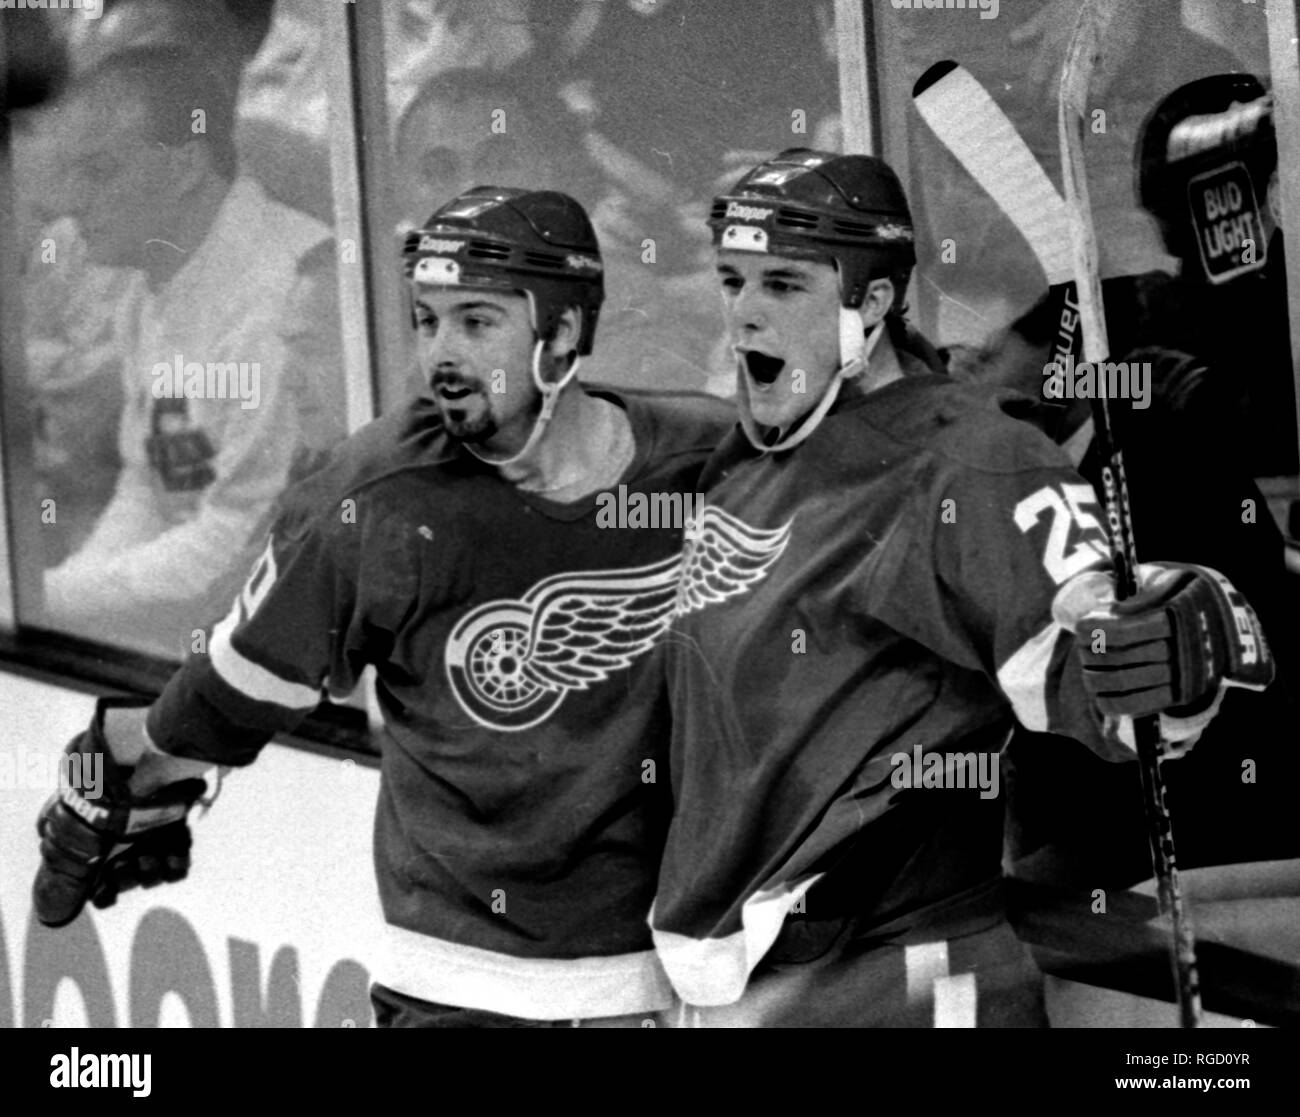 Darren Mccarty Photos and Premium High Res Pictures - Getty Images